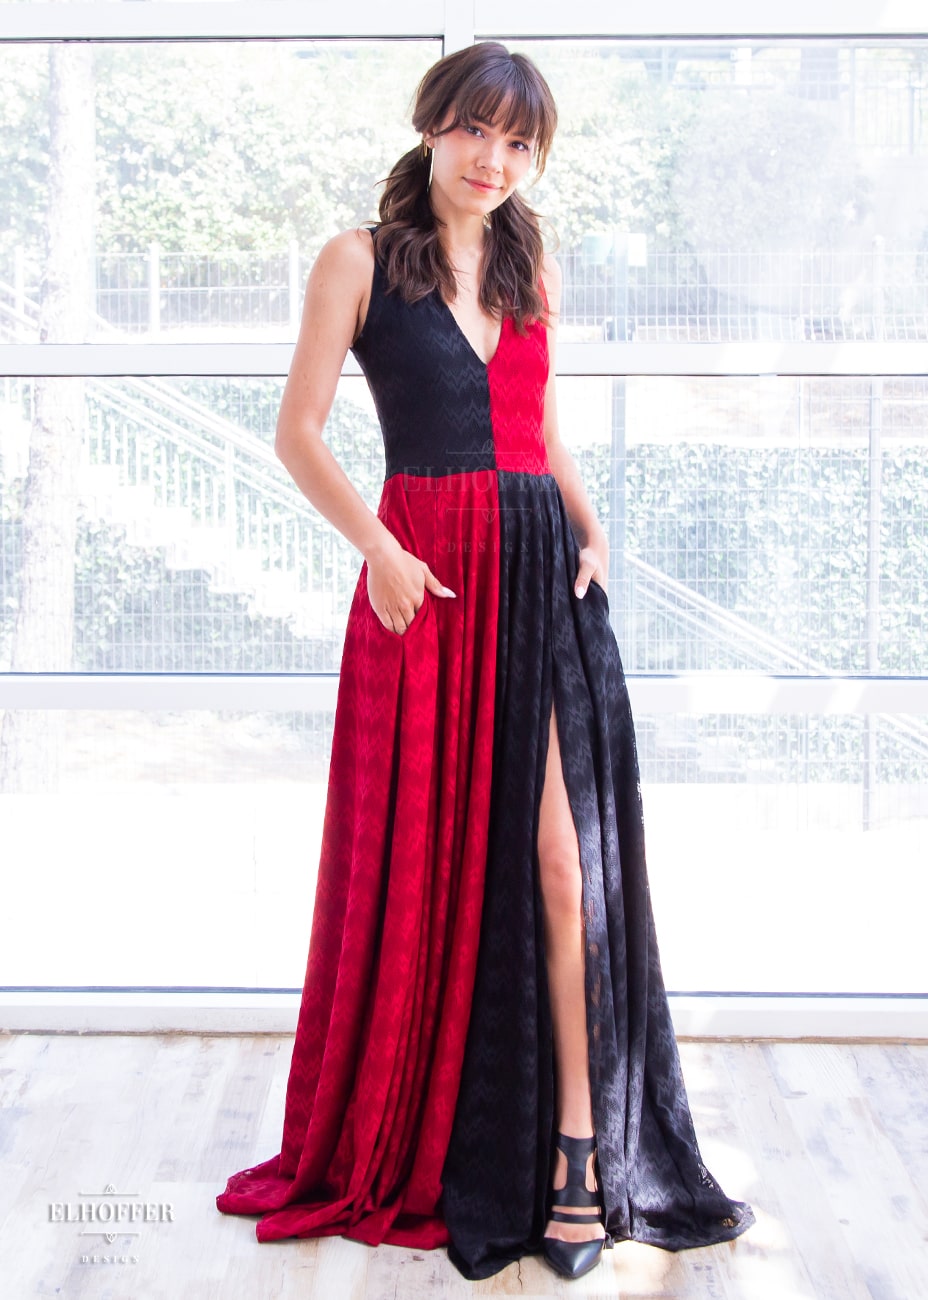 Erika, a size XS model with olive skin and long light brown hair, is wearing our Queen of Hearts Sirens Gala Gown. It is a pullover dress with low v-neck and side pockets with an incredibly full skirt with high slit covered in lace. One half of the top is red, one black, and the skirt is the opposite colors.